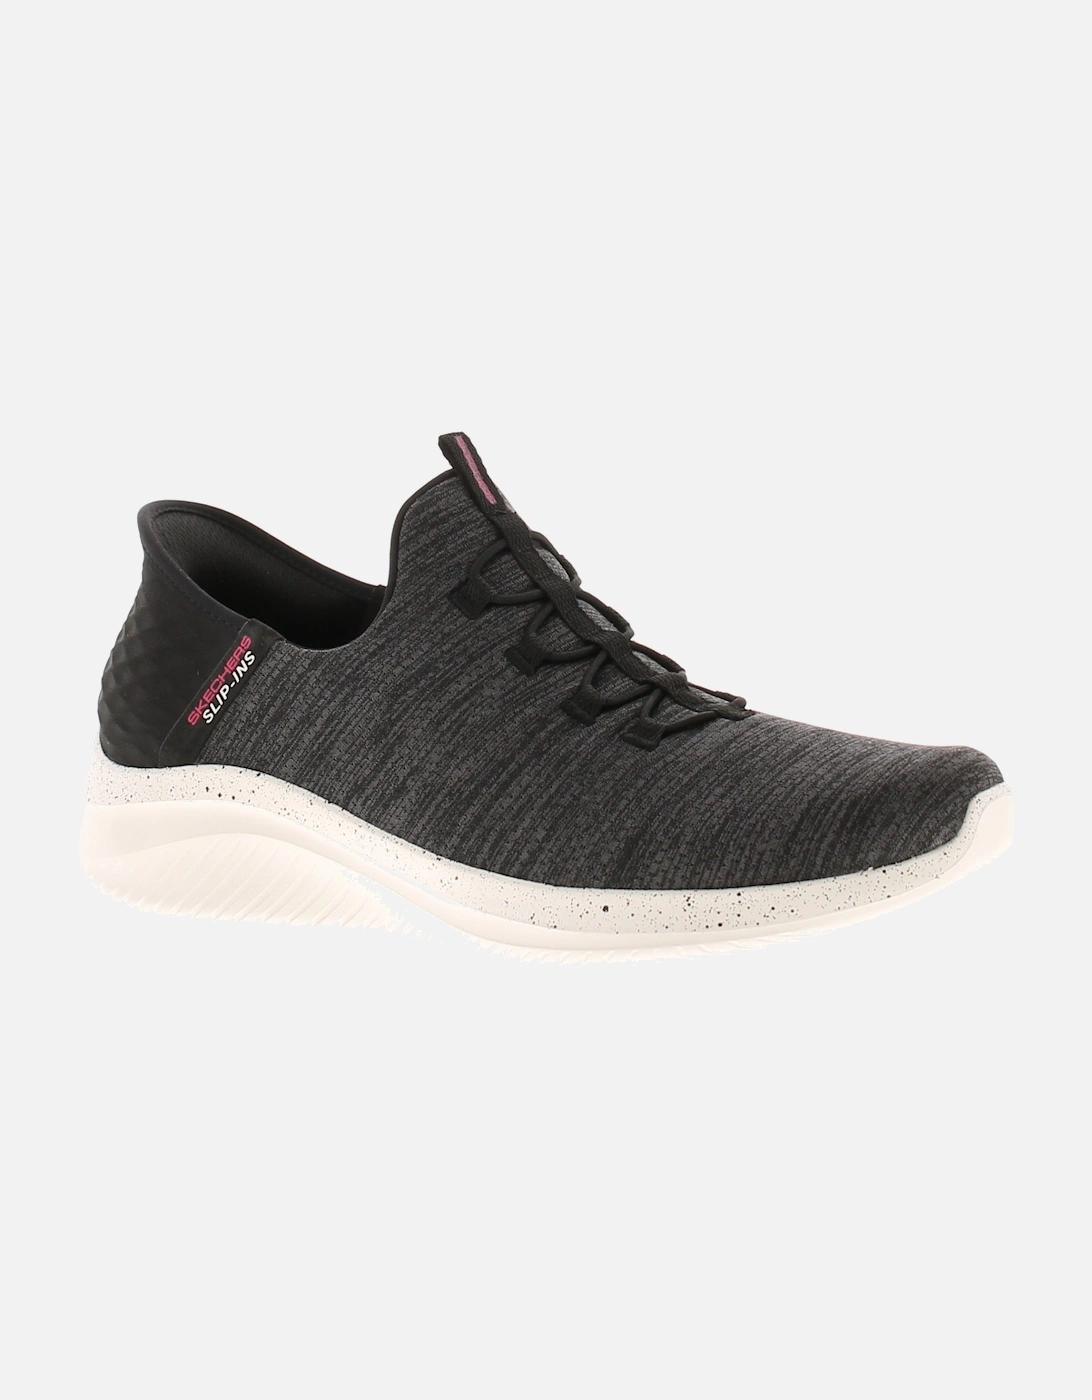 Womens Slip-Ins Trainers Ultra Flex 3 0 right black charcoal UK Size, 6 of 5